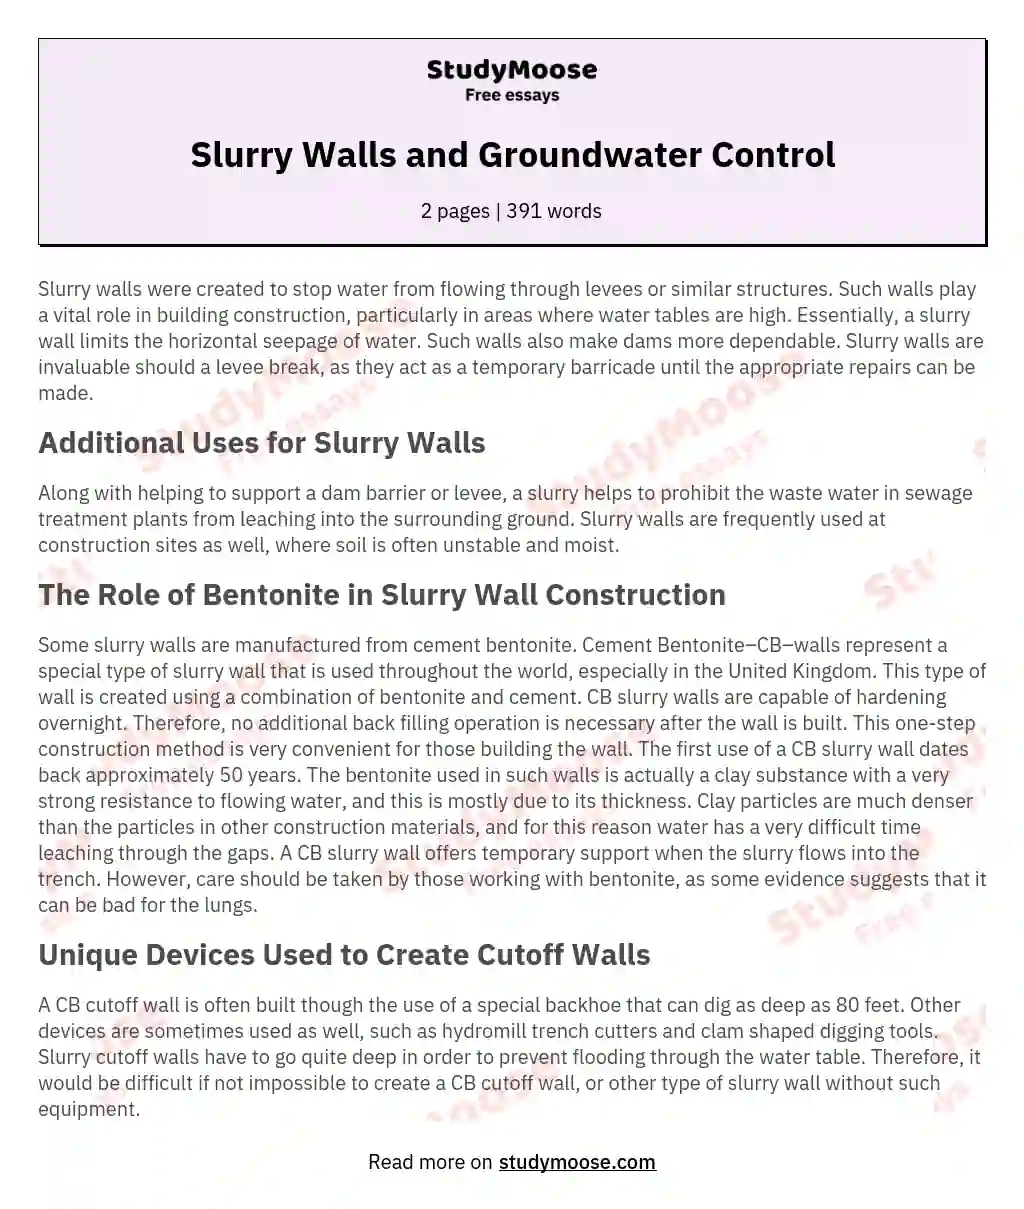 Slurry Walls and Groundwater Control